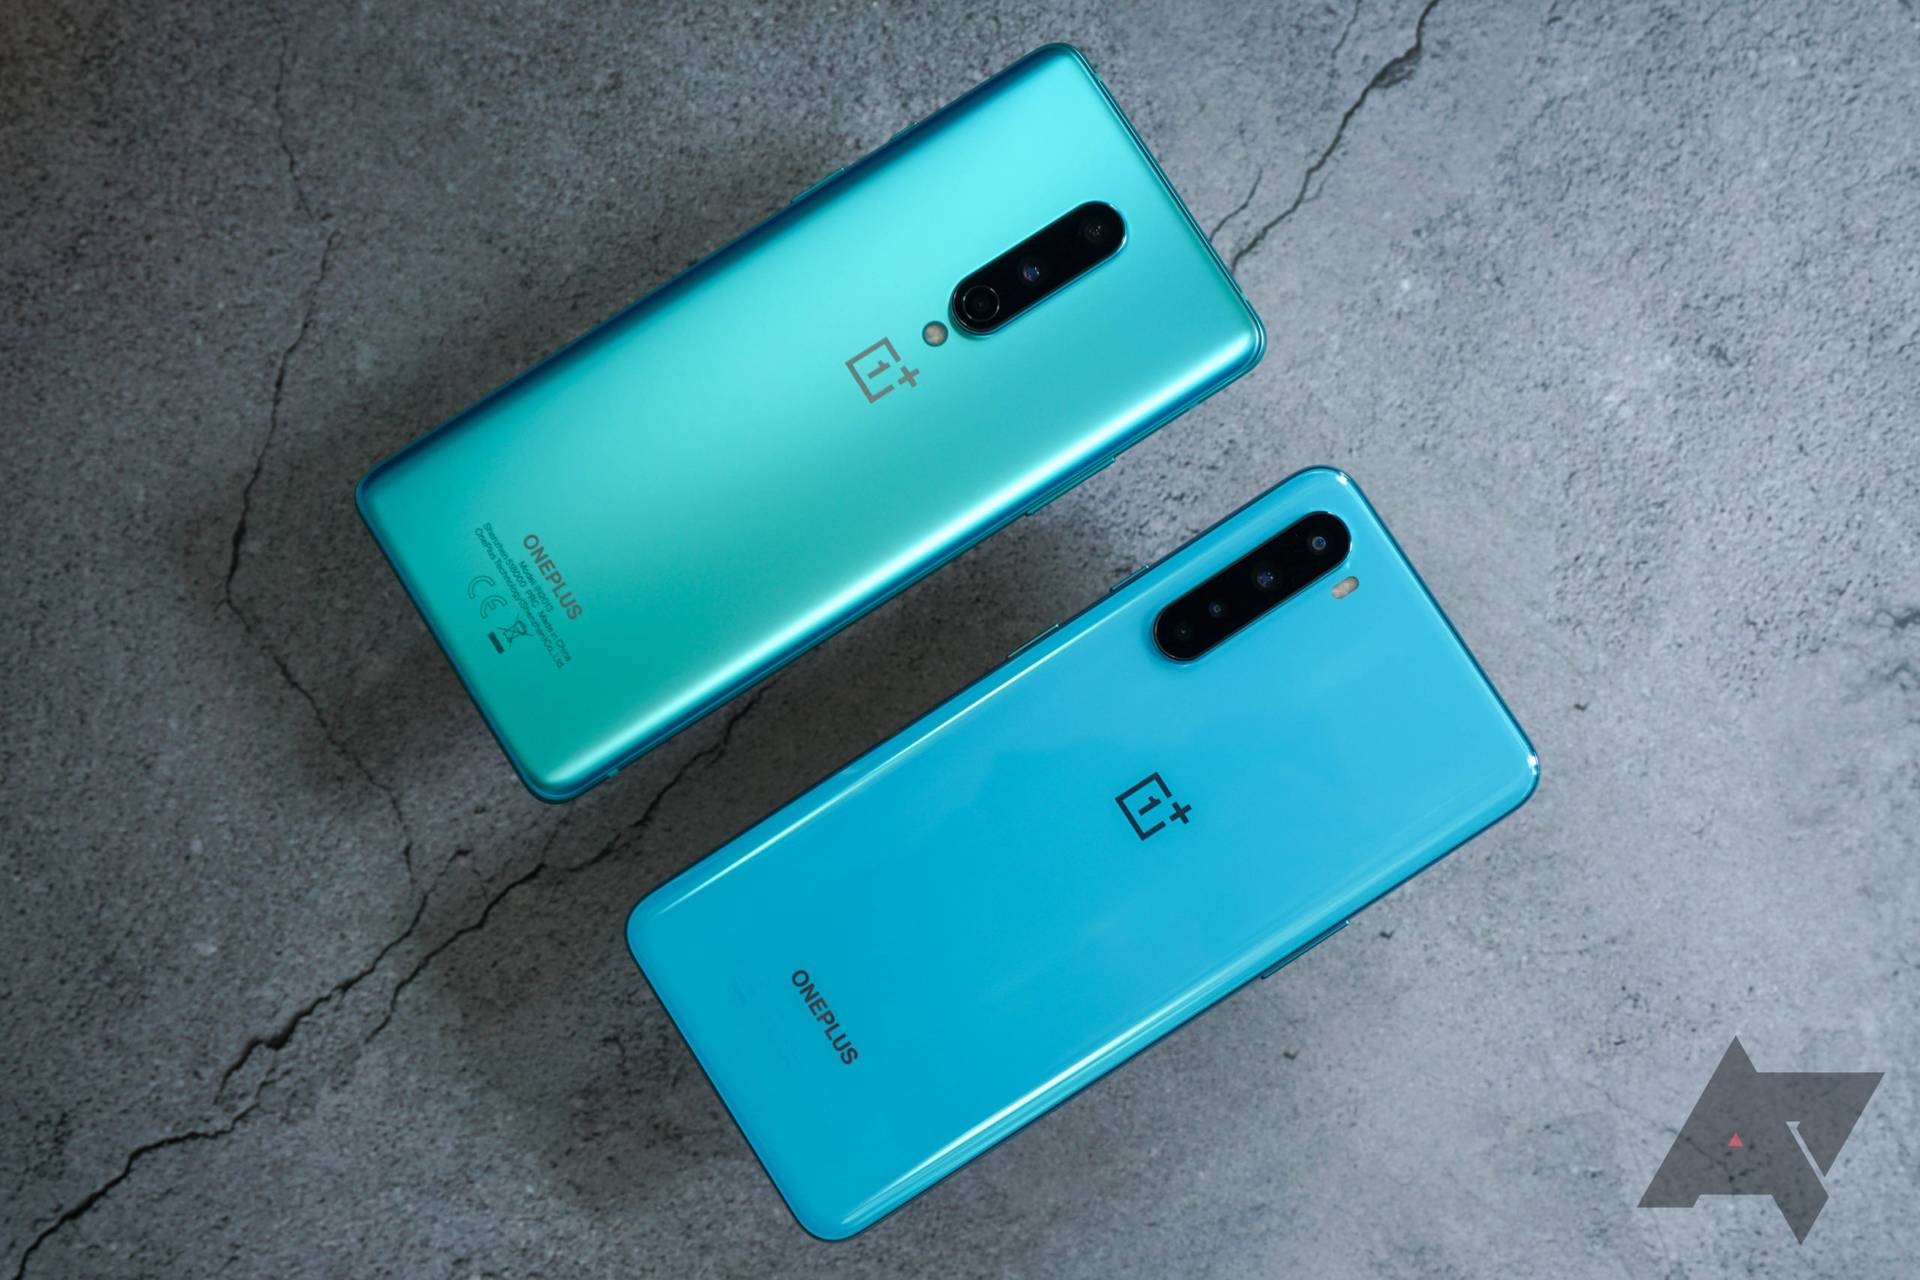 Following all its missteps, OnePlus could just spin off Nord into its own brand